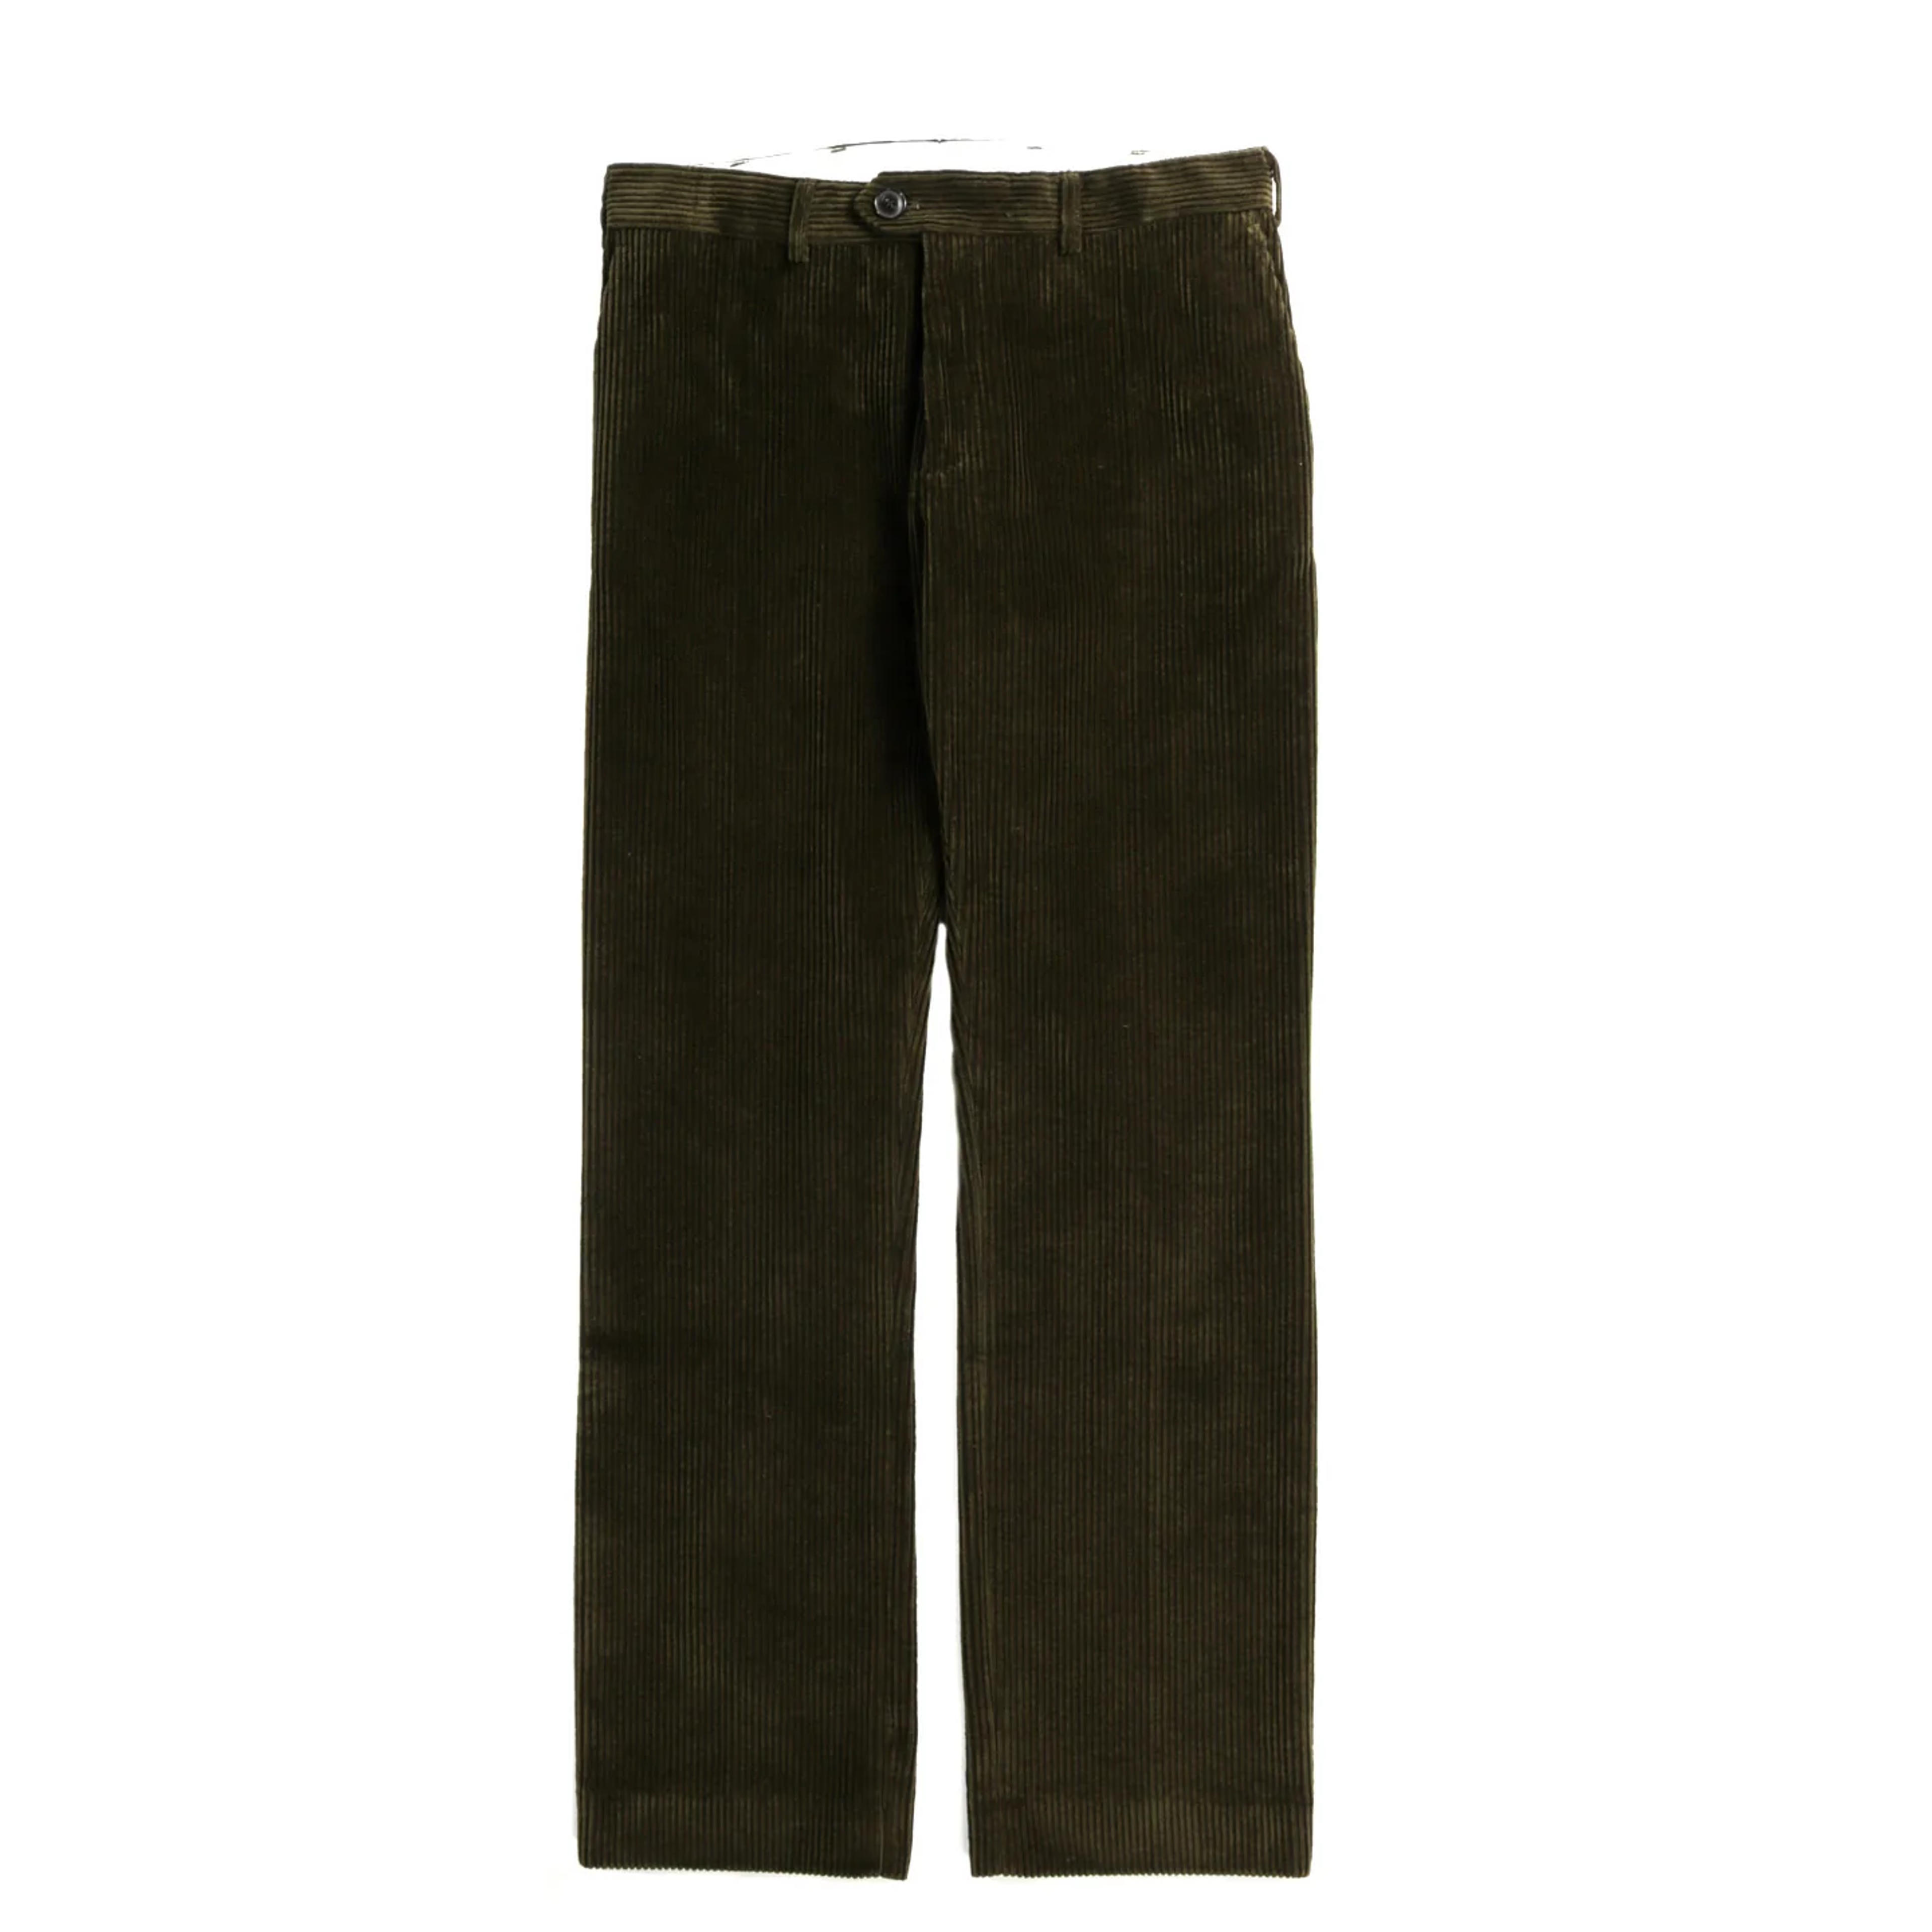 A KIND OF GUISE RELAXED TAILORED TROUSERS OLIVE CORDUROY | TODAY CLOTHING